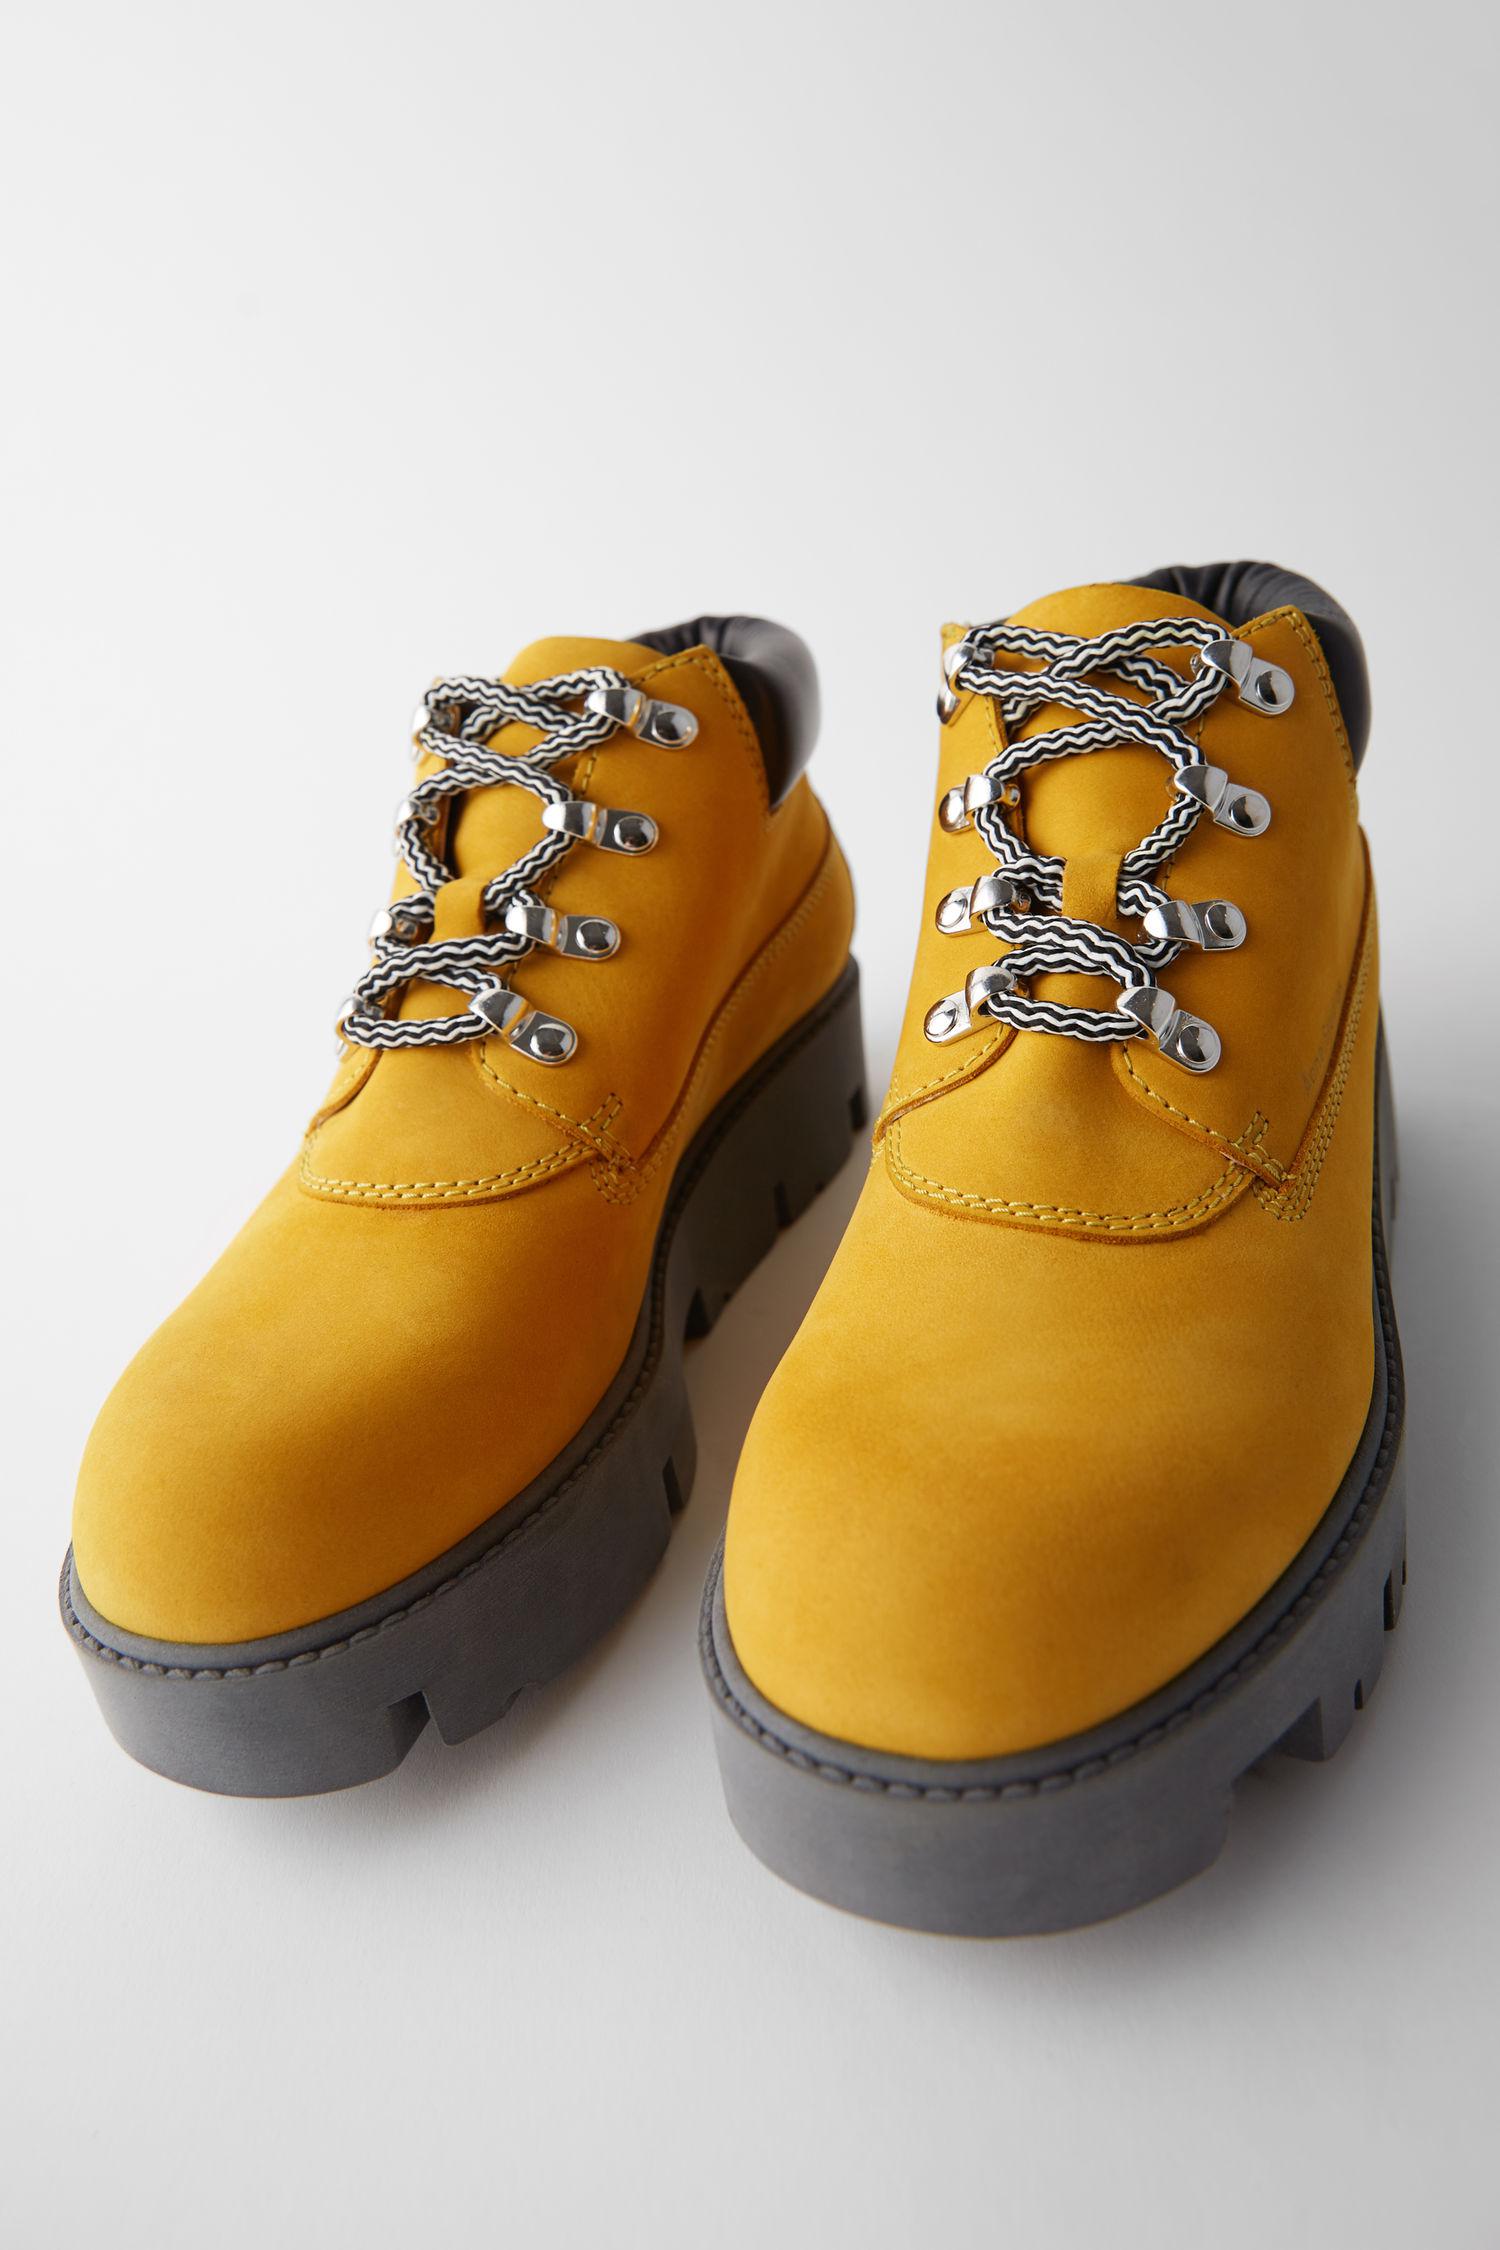 Acne Studios Rubber Yellow Suede Ankle 